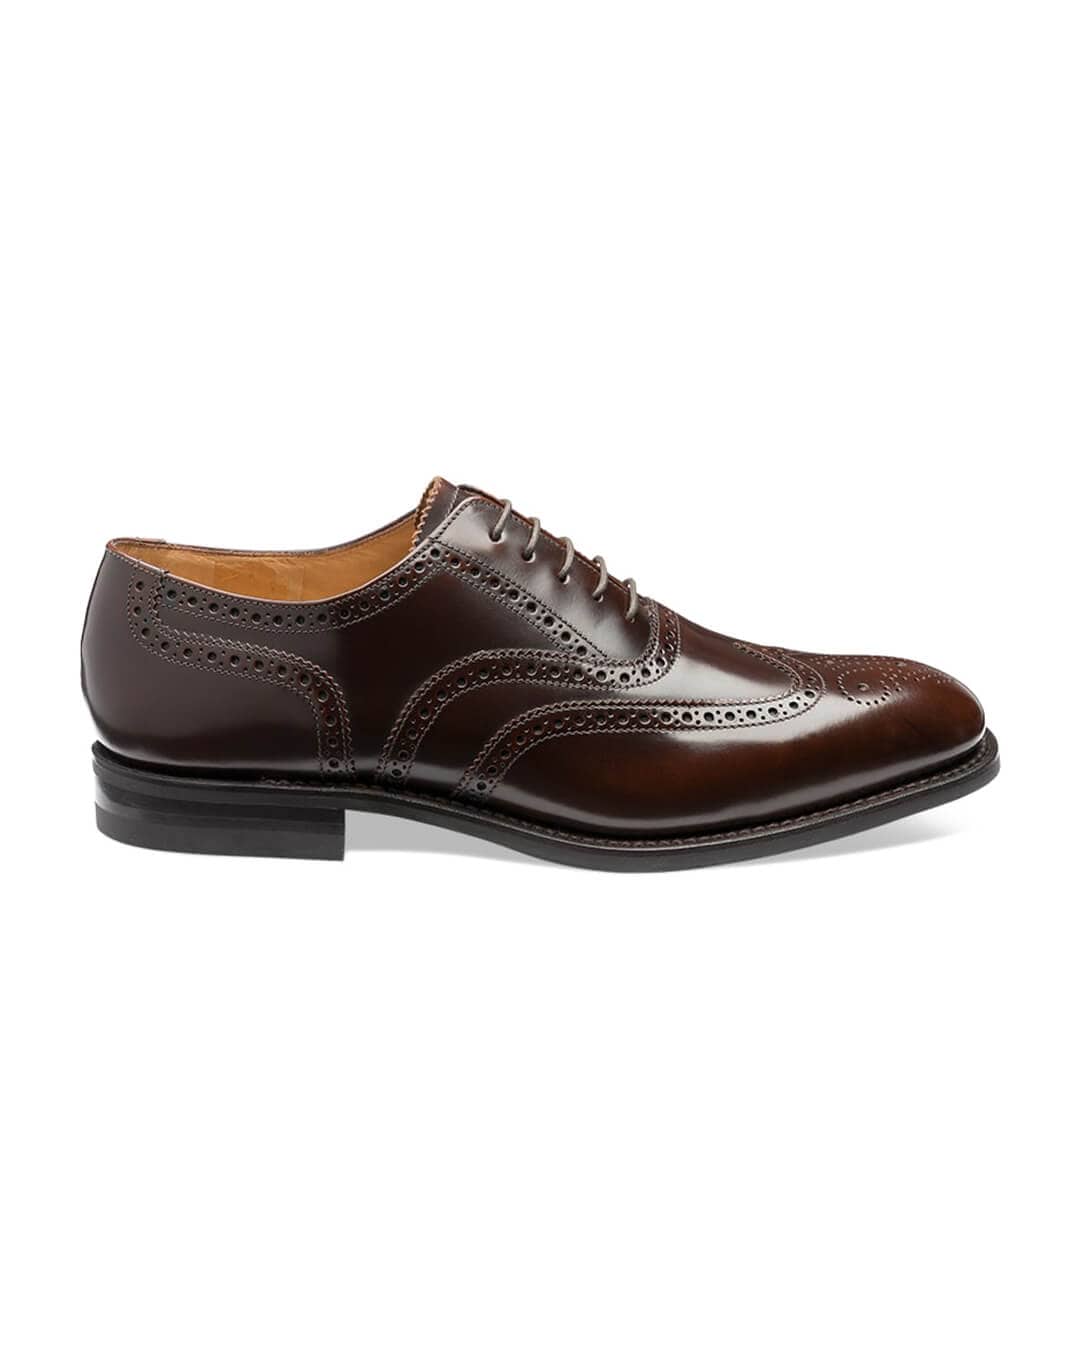 Loake Shoes Loake Brown 302 Oford Wingtip Brogues Shoes